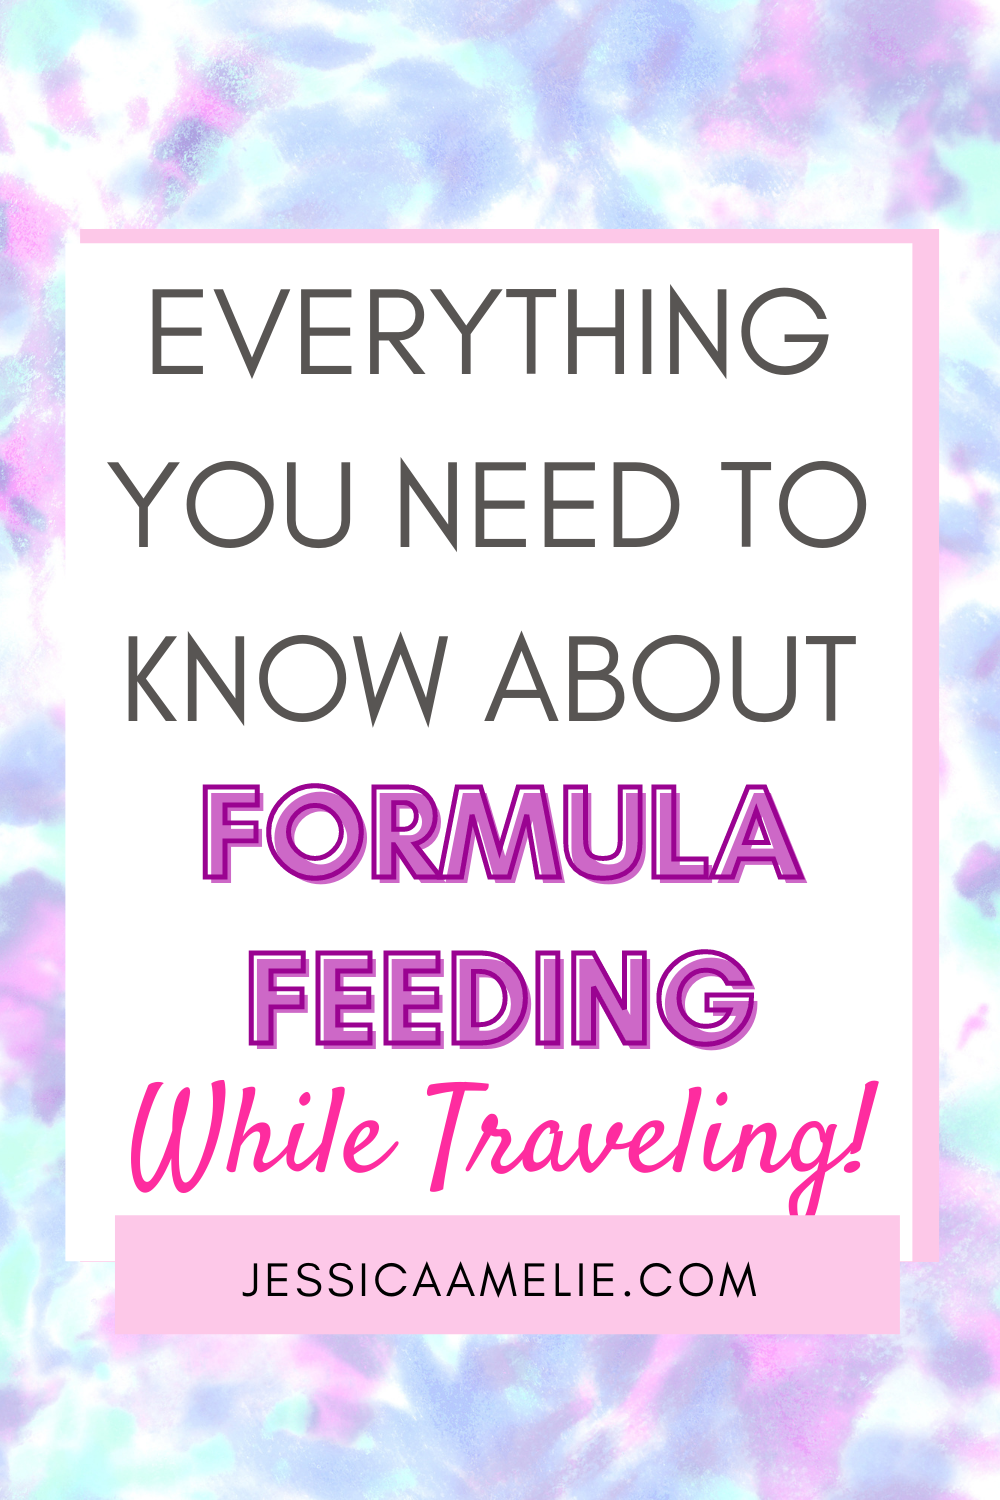 Everything You Need to Know About Formula Feeding While Traveling